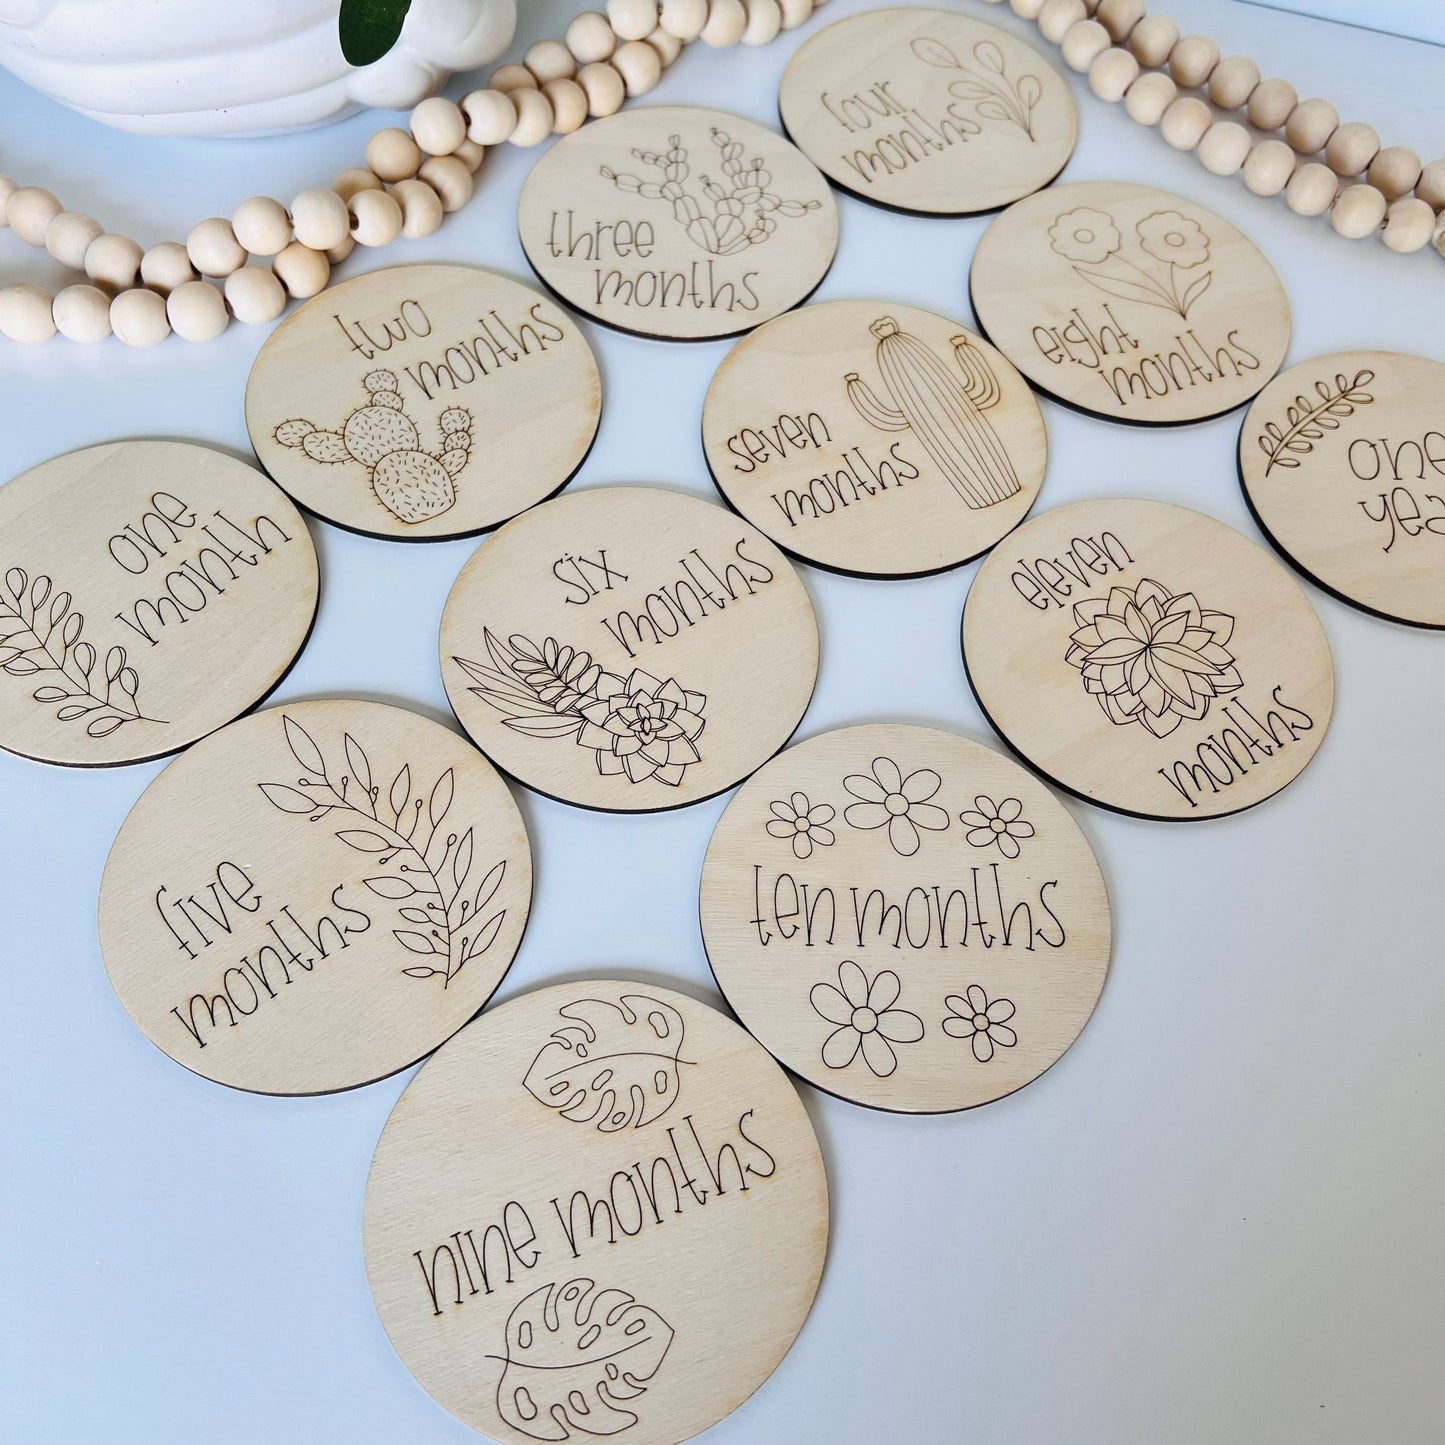 Wooden Monthly Milestone Markers for Baby Photos, Plant Themed Milestone Disc, Baby Gift